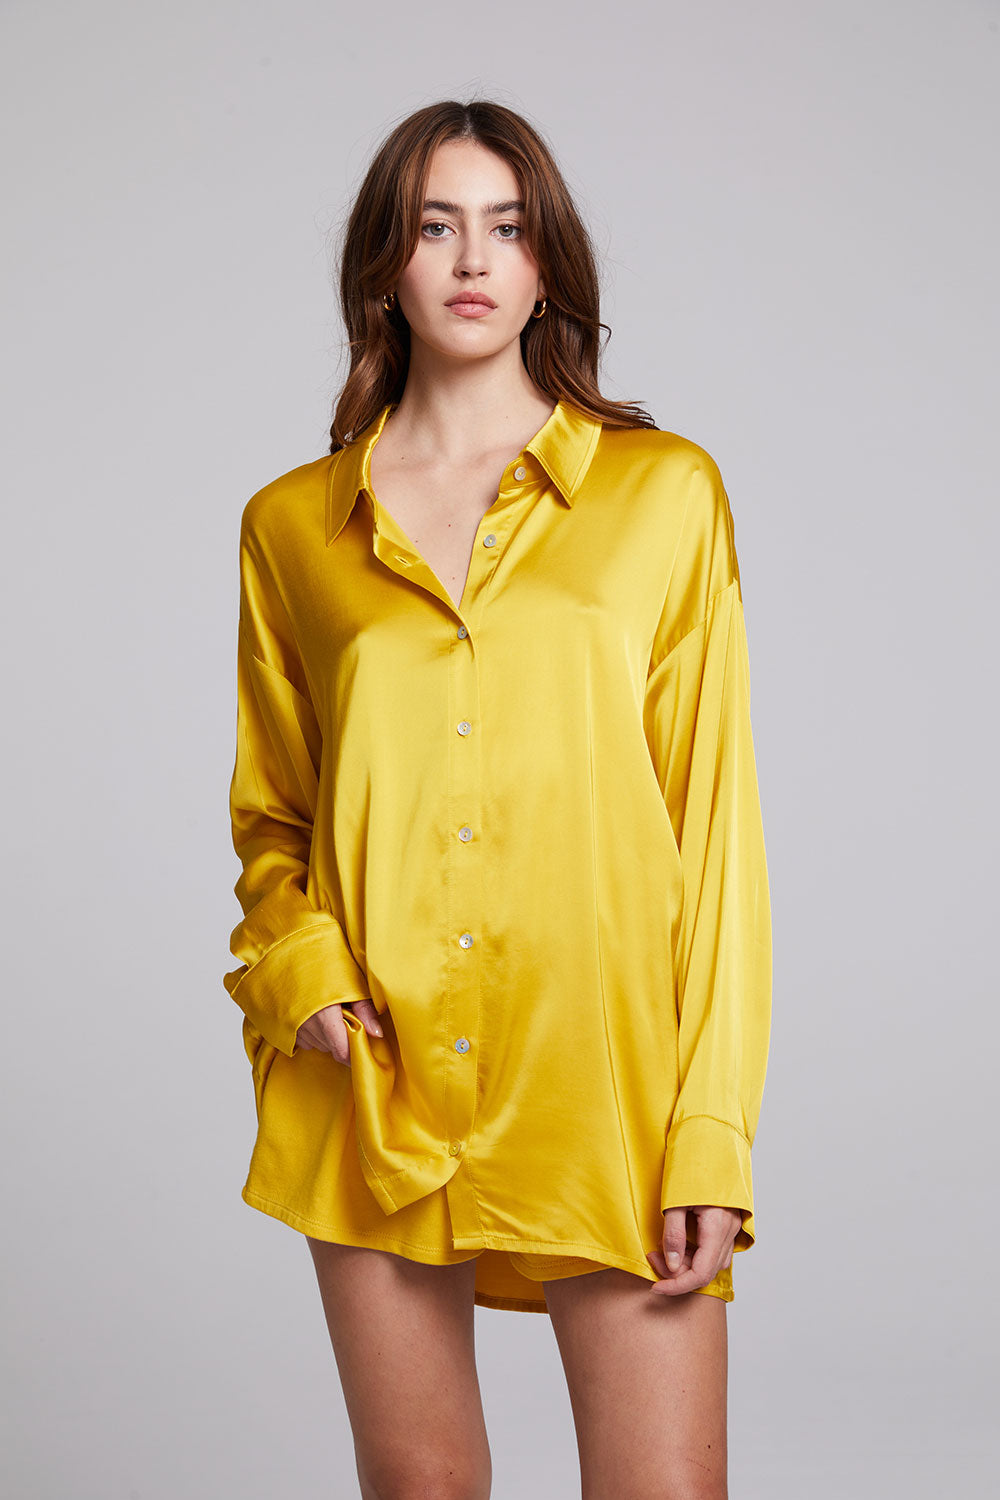 Capri Mimosa Button Down WOMENS chaserbrand